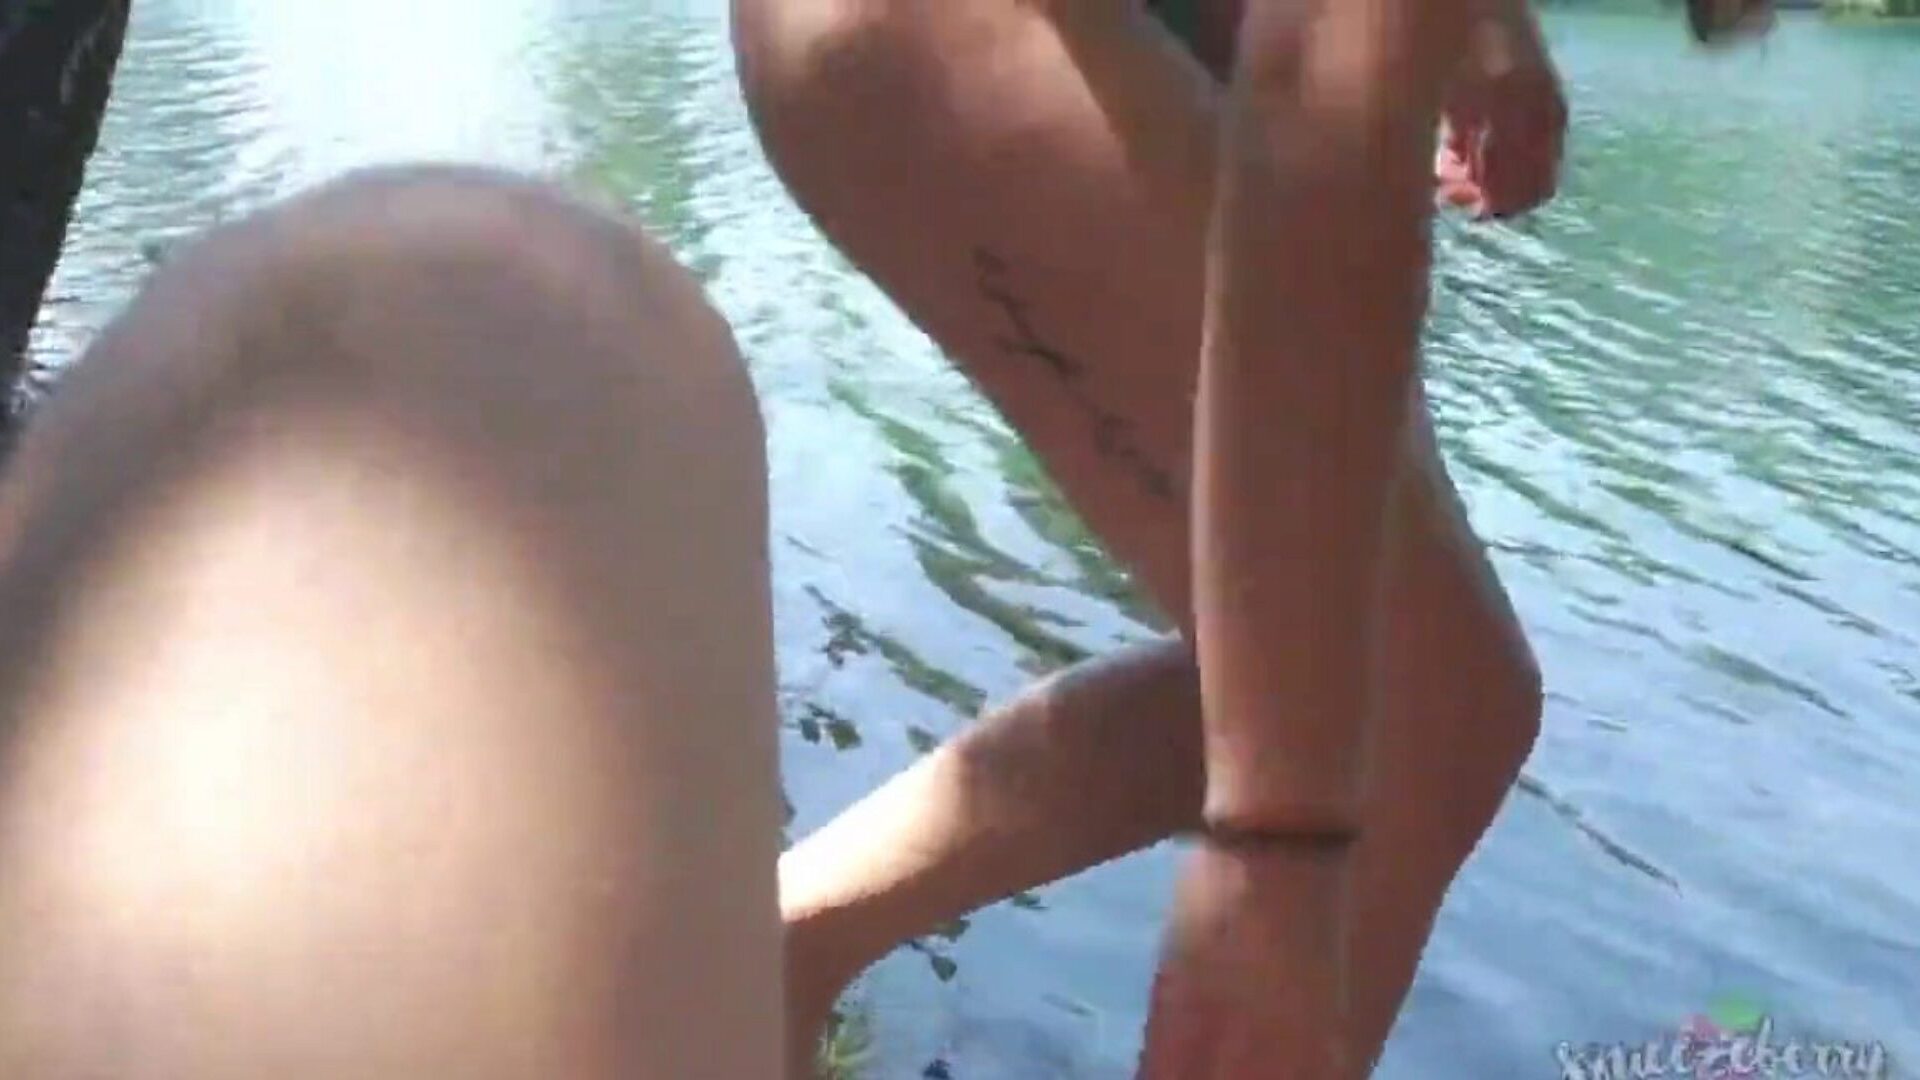 Public Creampie at the Lake, Free Xshare Mobile HD Porn 8d Watch Public Creampie at the Lake video on xHamster, the giant HD lovemaking tube web page with tons of free Xshare Mobile Tube Tnaflix & Teen pornography vids